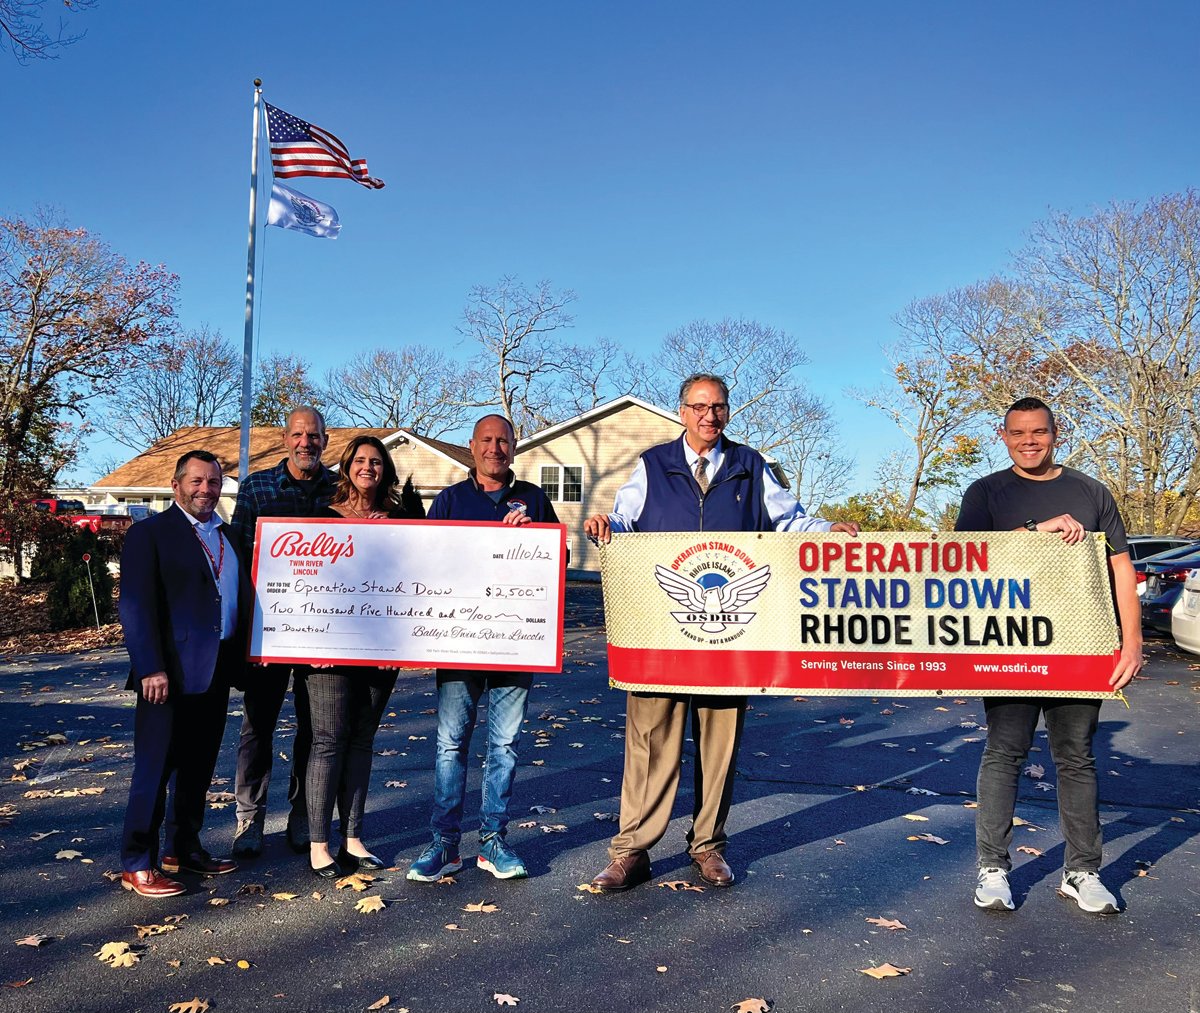 HONORING VETERANS: Executives from Bally’s Rhode Island recently presented a check for $2,500, as well as hygiene products from its recent employee drive to Operation Stand Down Rhode Island (OSDRI), based in Johnston. Joining Kim Ward, Regional Executive Director of Public & Community Affairs, was Craig Sculos, Senior Vice President and General Manager of Bally’s Tiverton Casino & Hotel and Tony Rohrer, Vice President and General Manager of Bally’s Twin River Lincoln Casino Resort. They presented the check and products to Erik Wallin, Captain, USAF and Executive Director of Operation Stand Down.